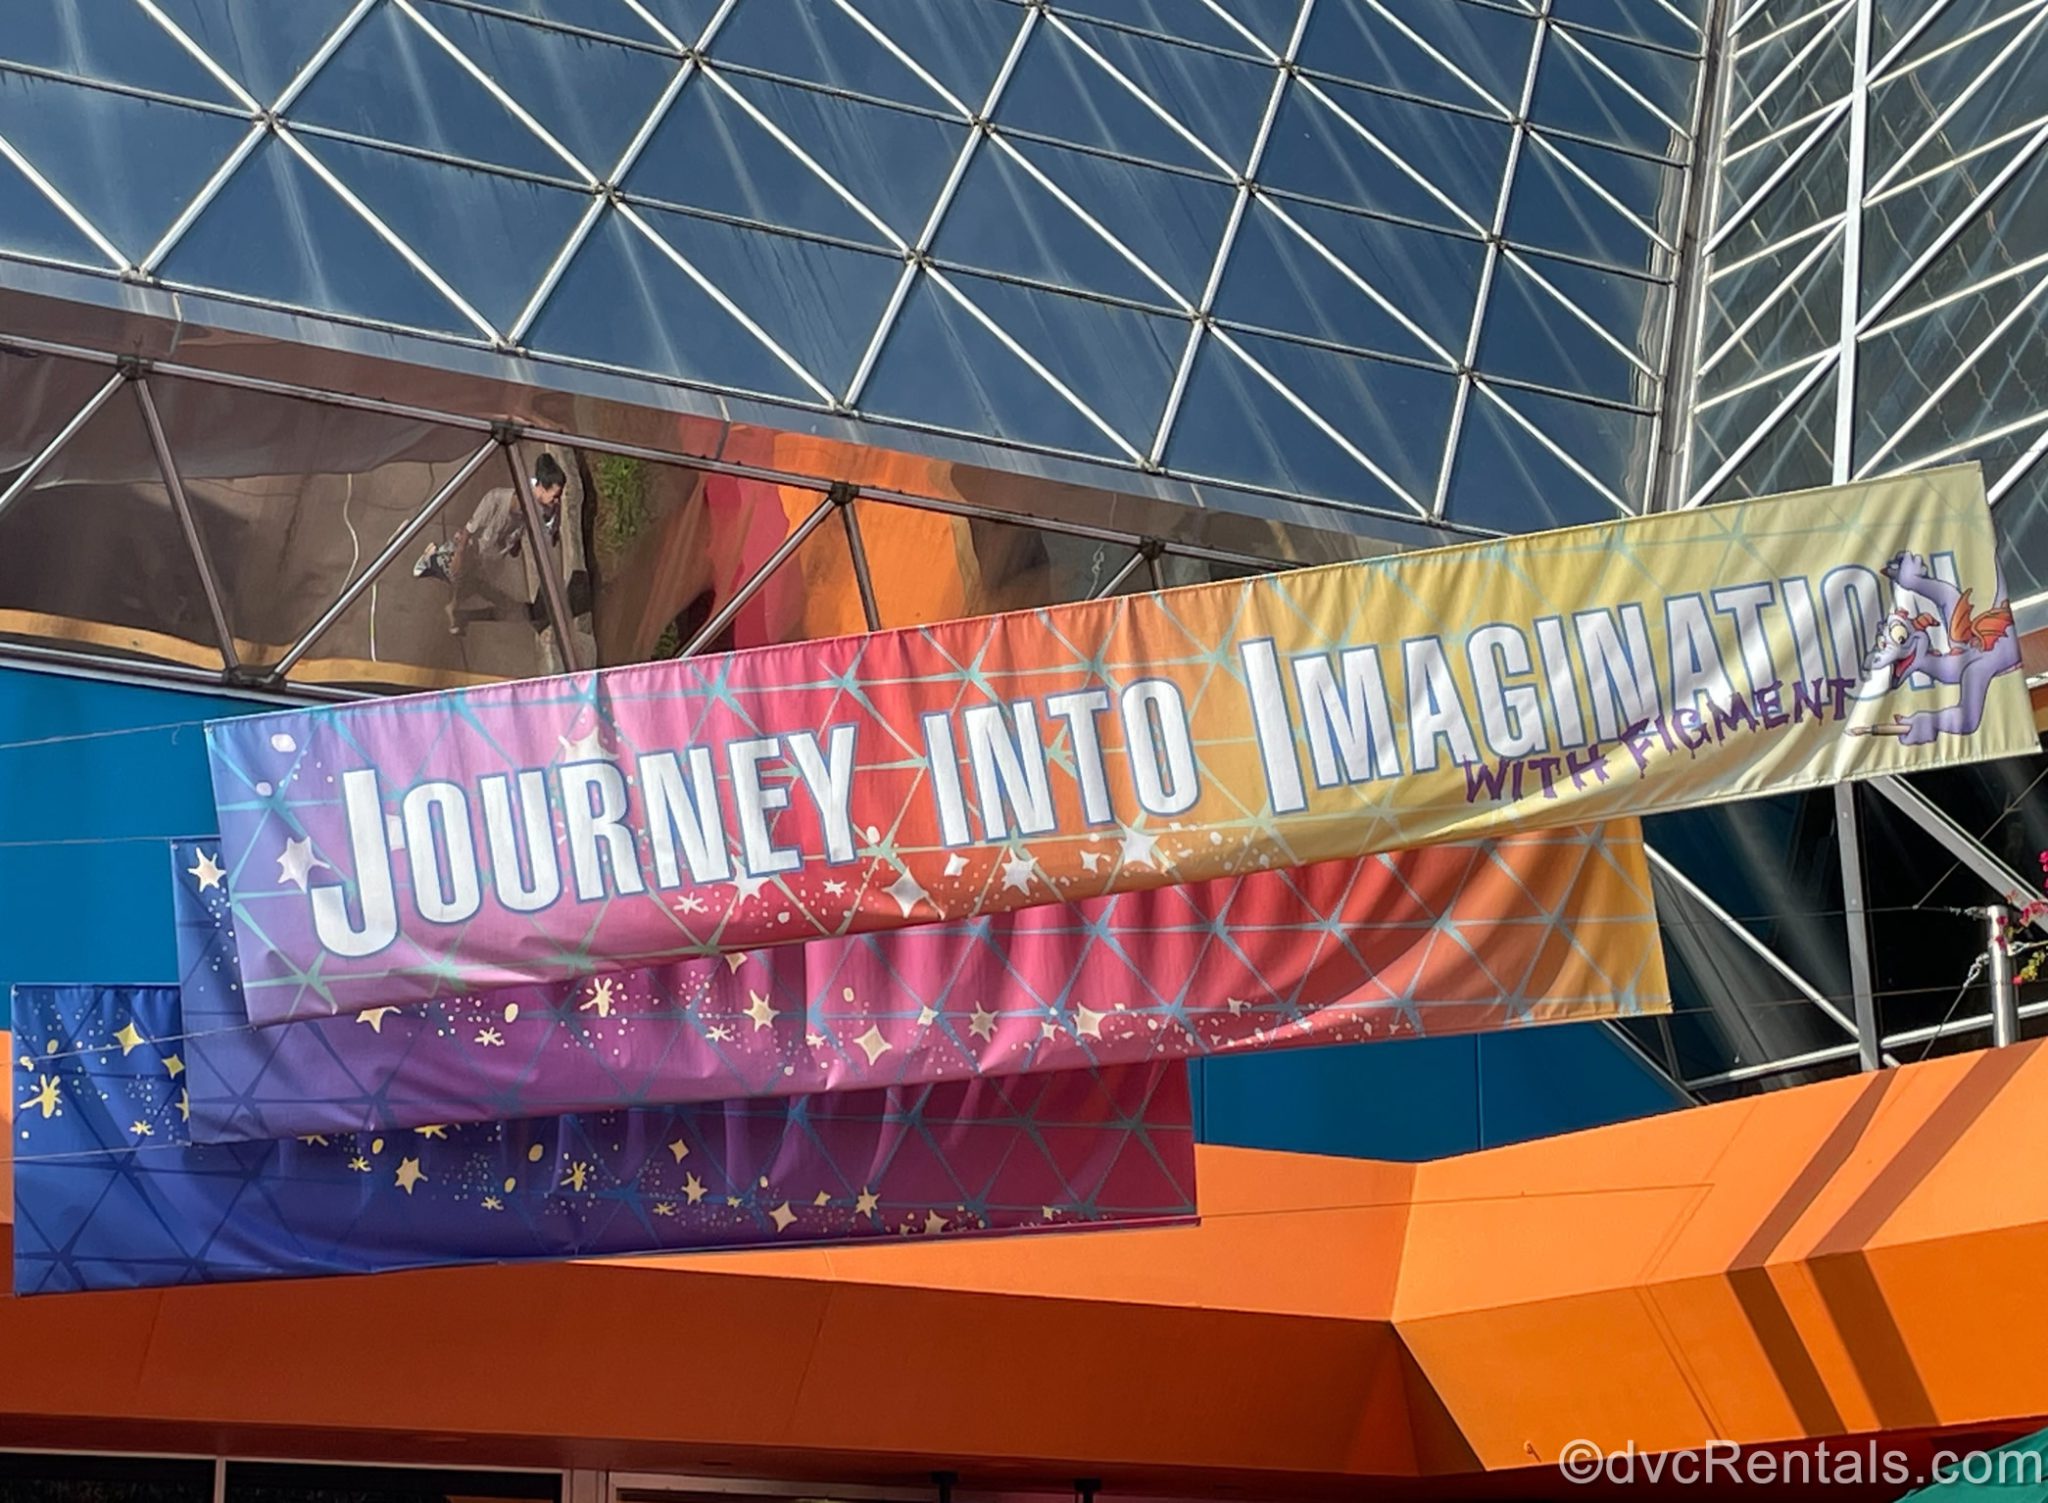 The Journey Into Imagination With Figment banner outside the EPCOT attraction